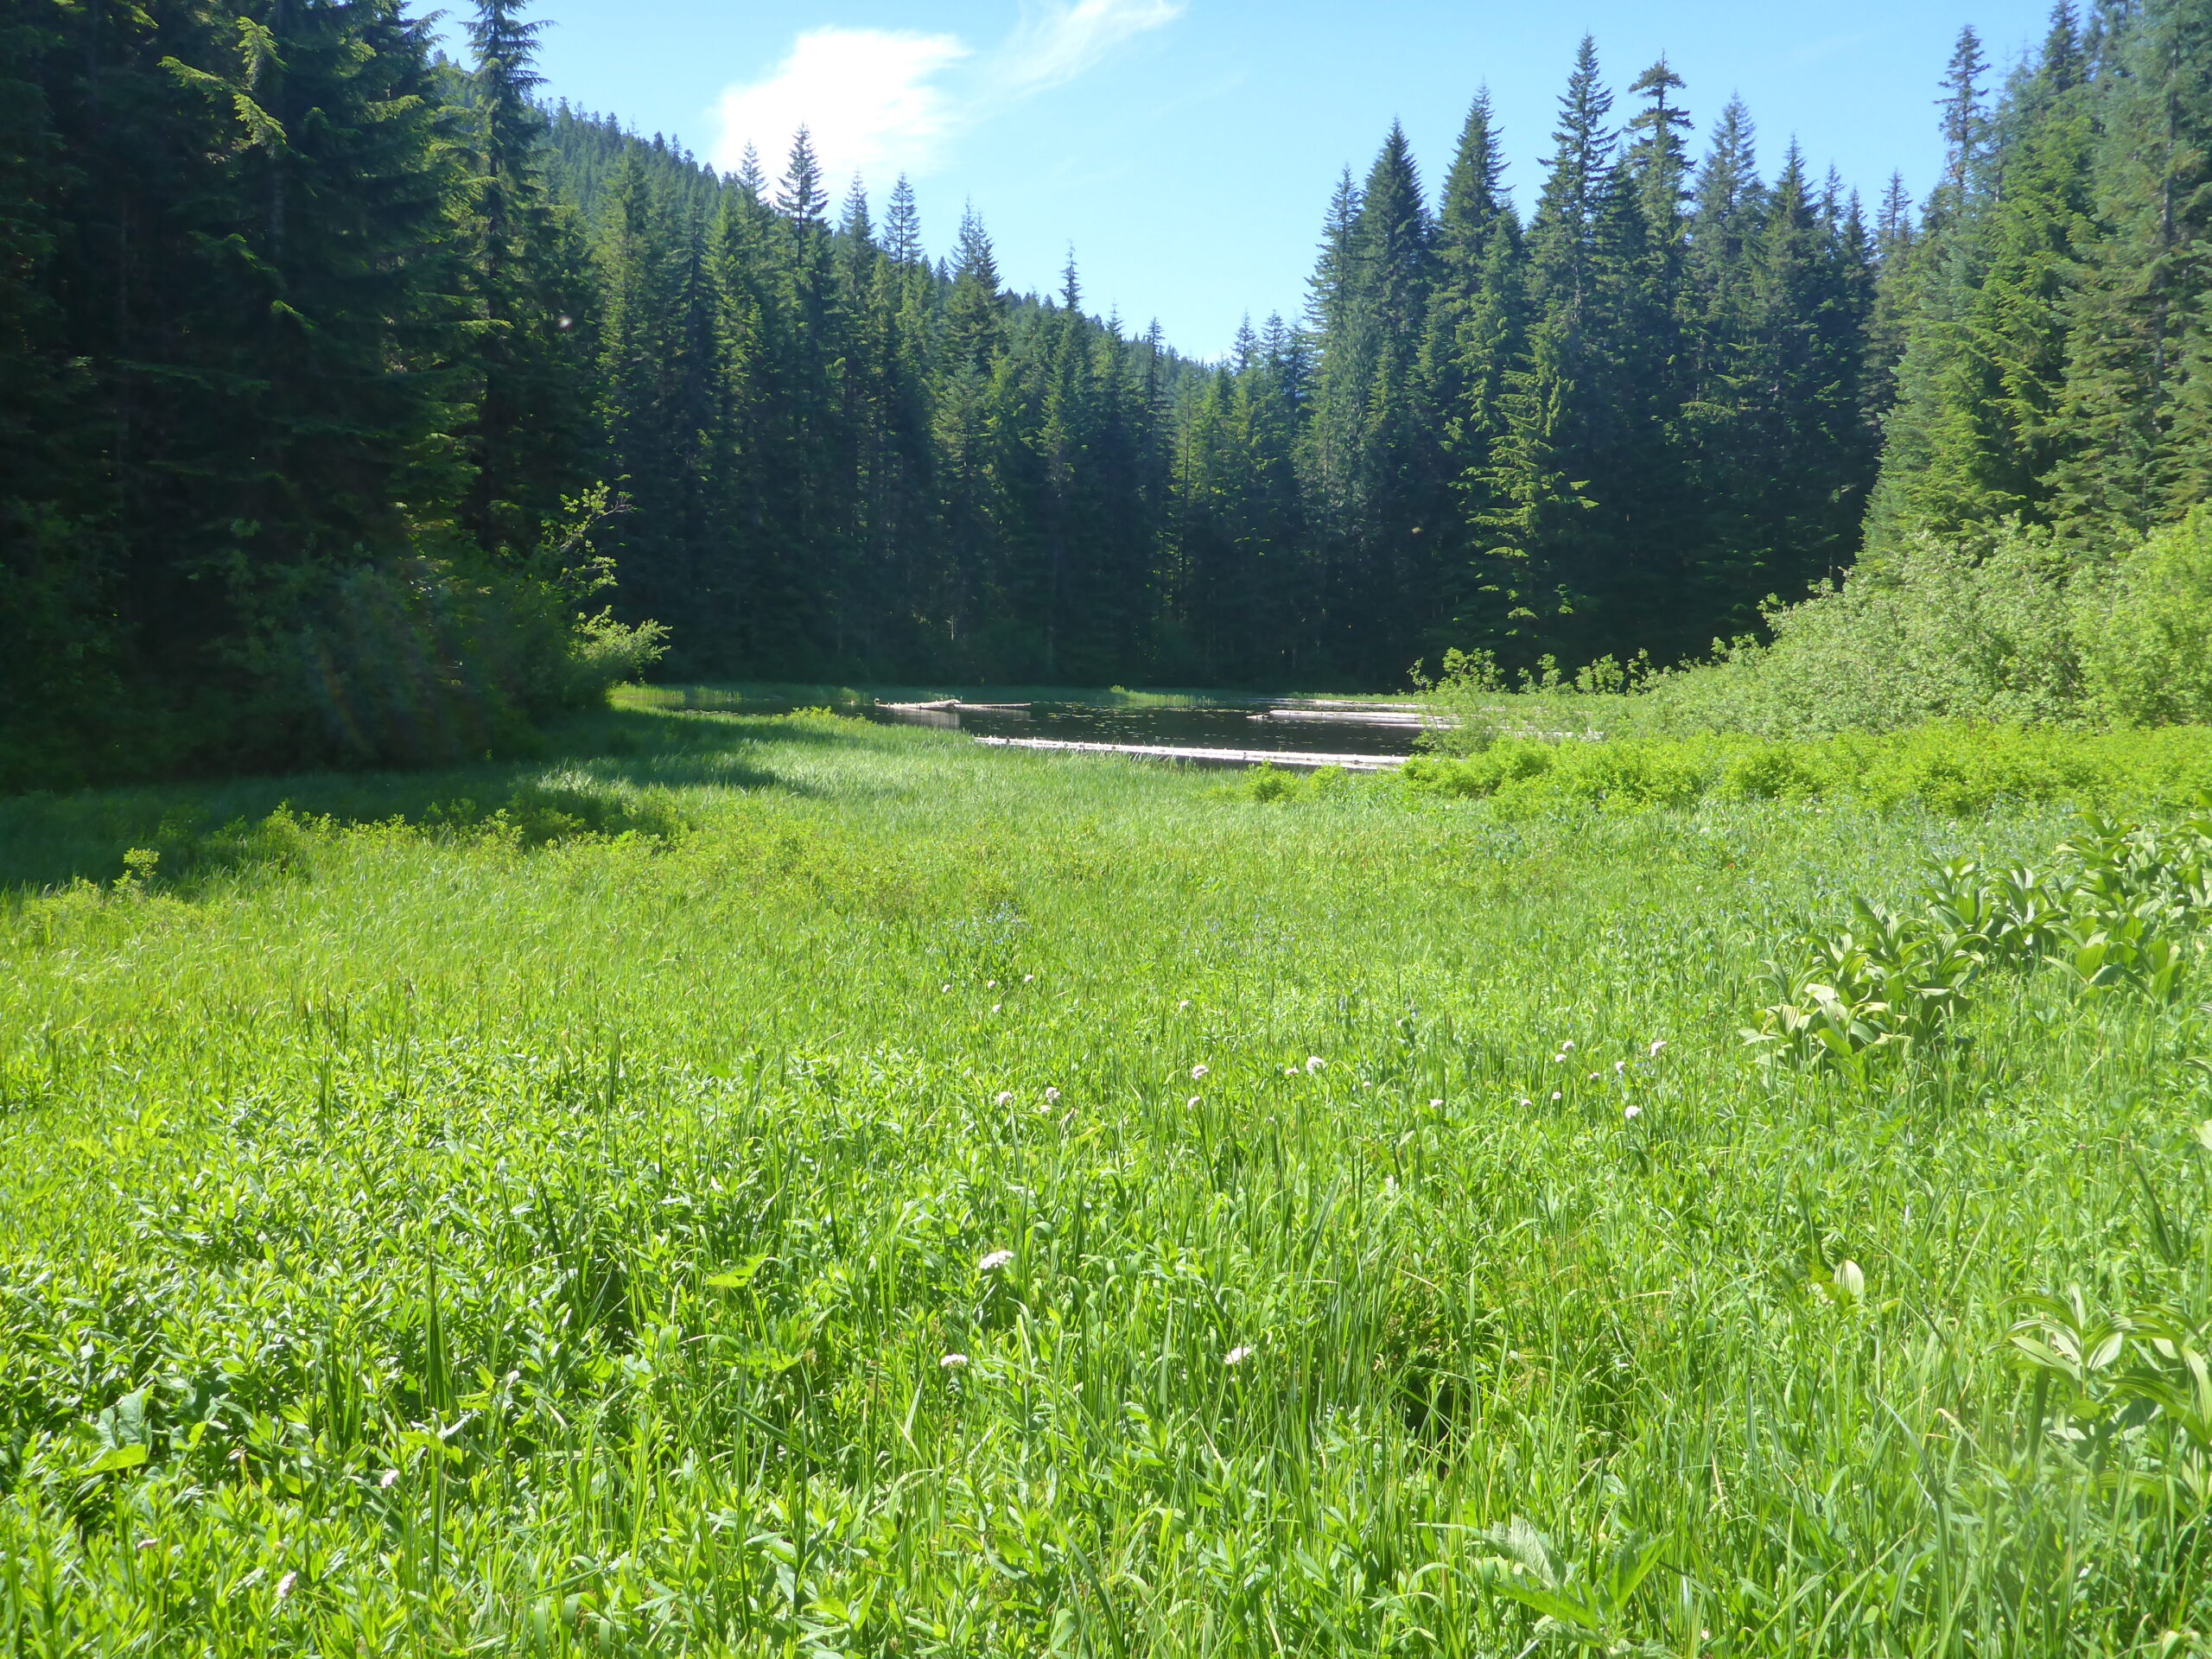 In the foreground there is medium length bright green grass. In the foreground of the photo there is a sliver of a meadow surrounded by the forest's edge.